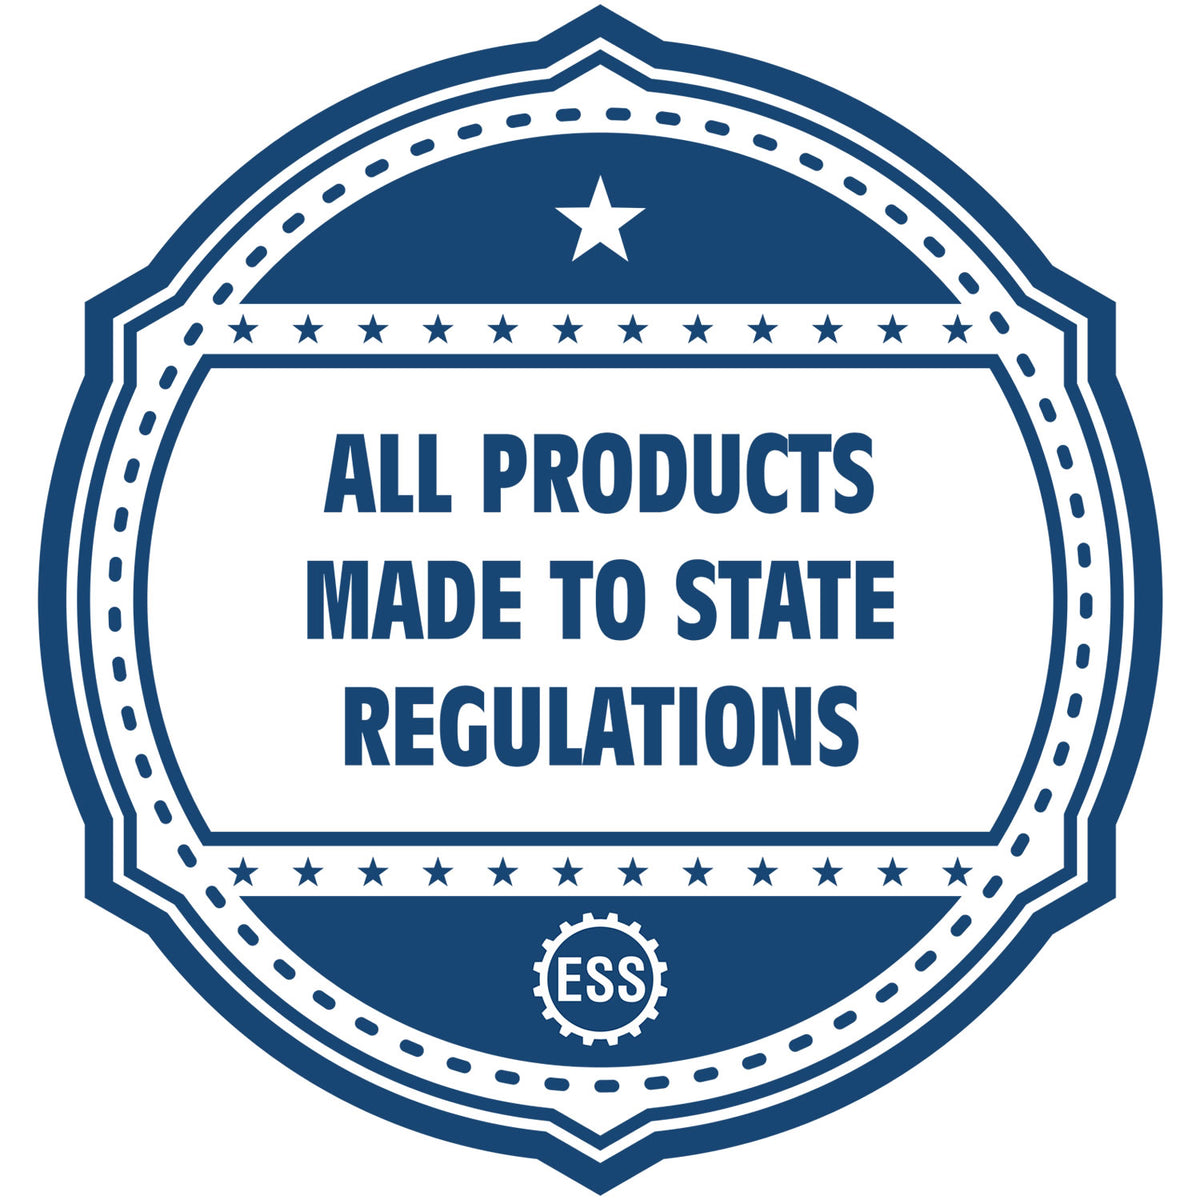 An icon or badge element for the Slim Pre-Inked State Seal Notary Stamp for Kentucky showing that this product is made in compliance with state regulations.